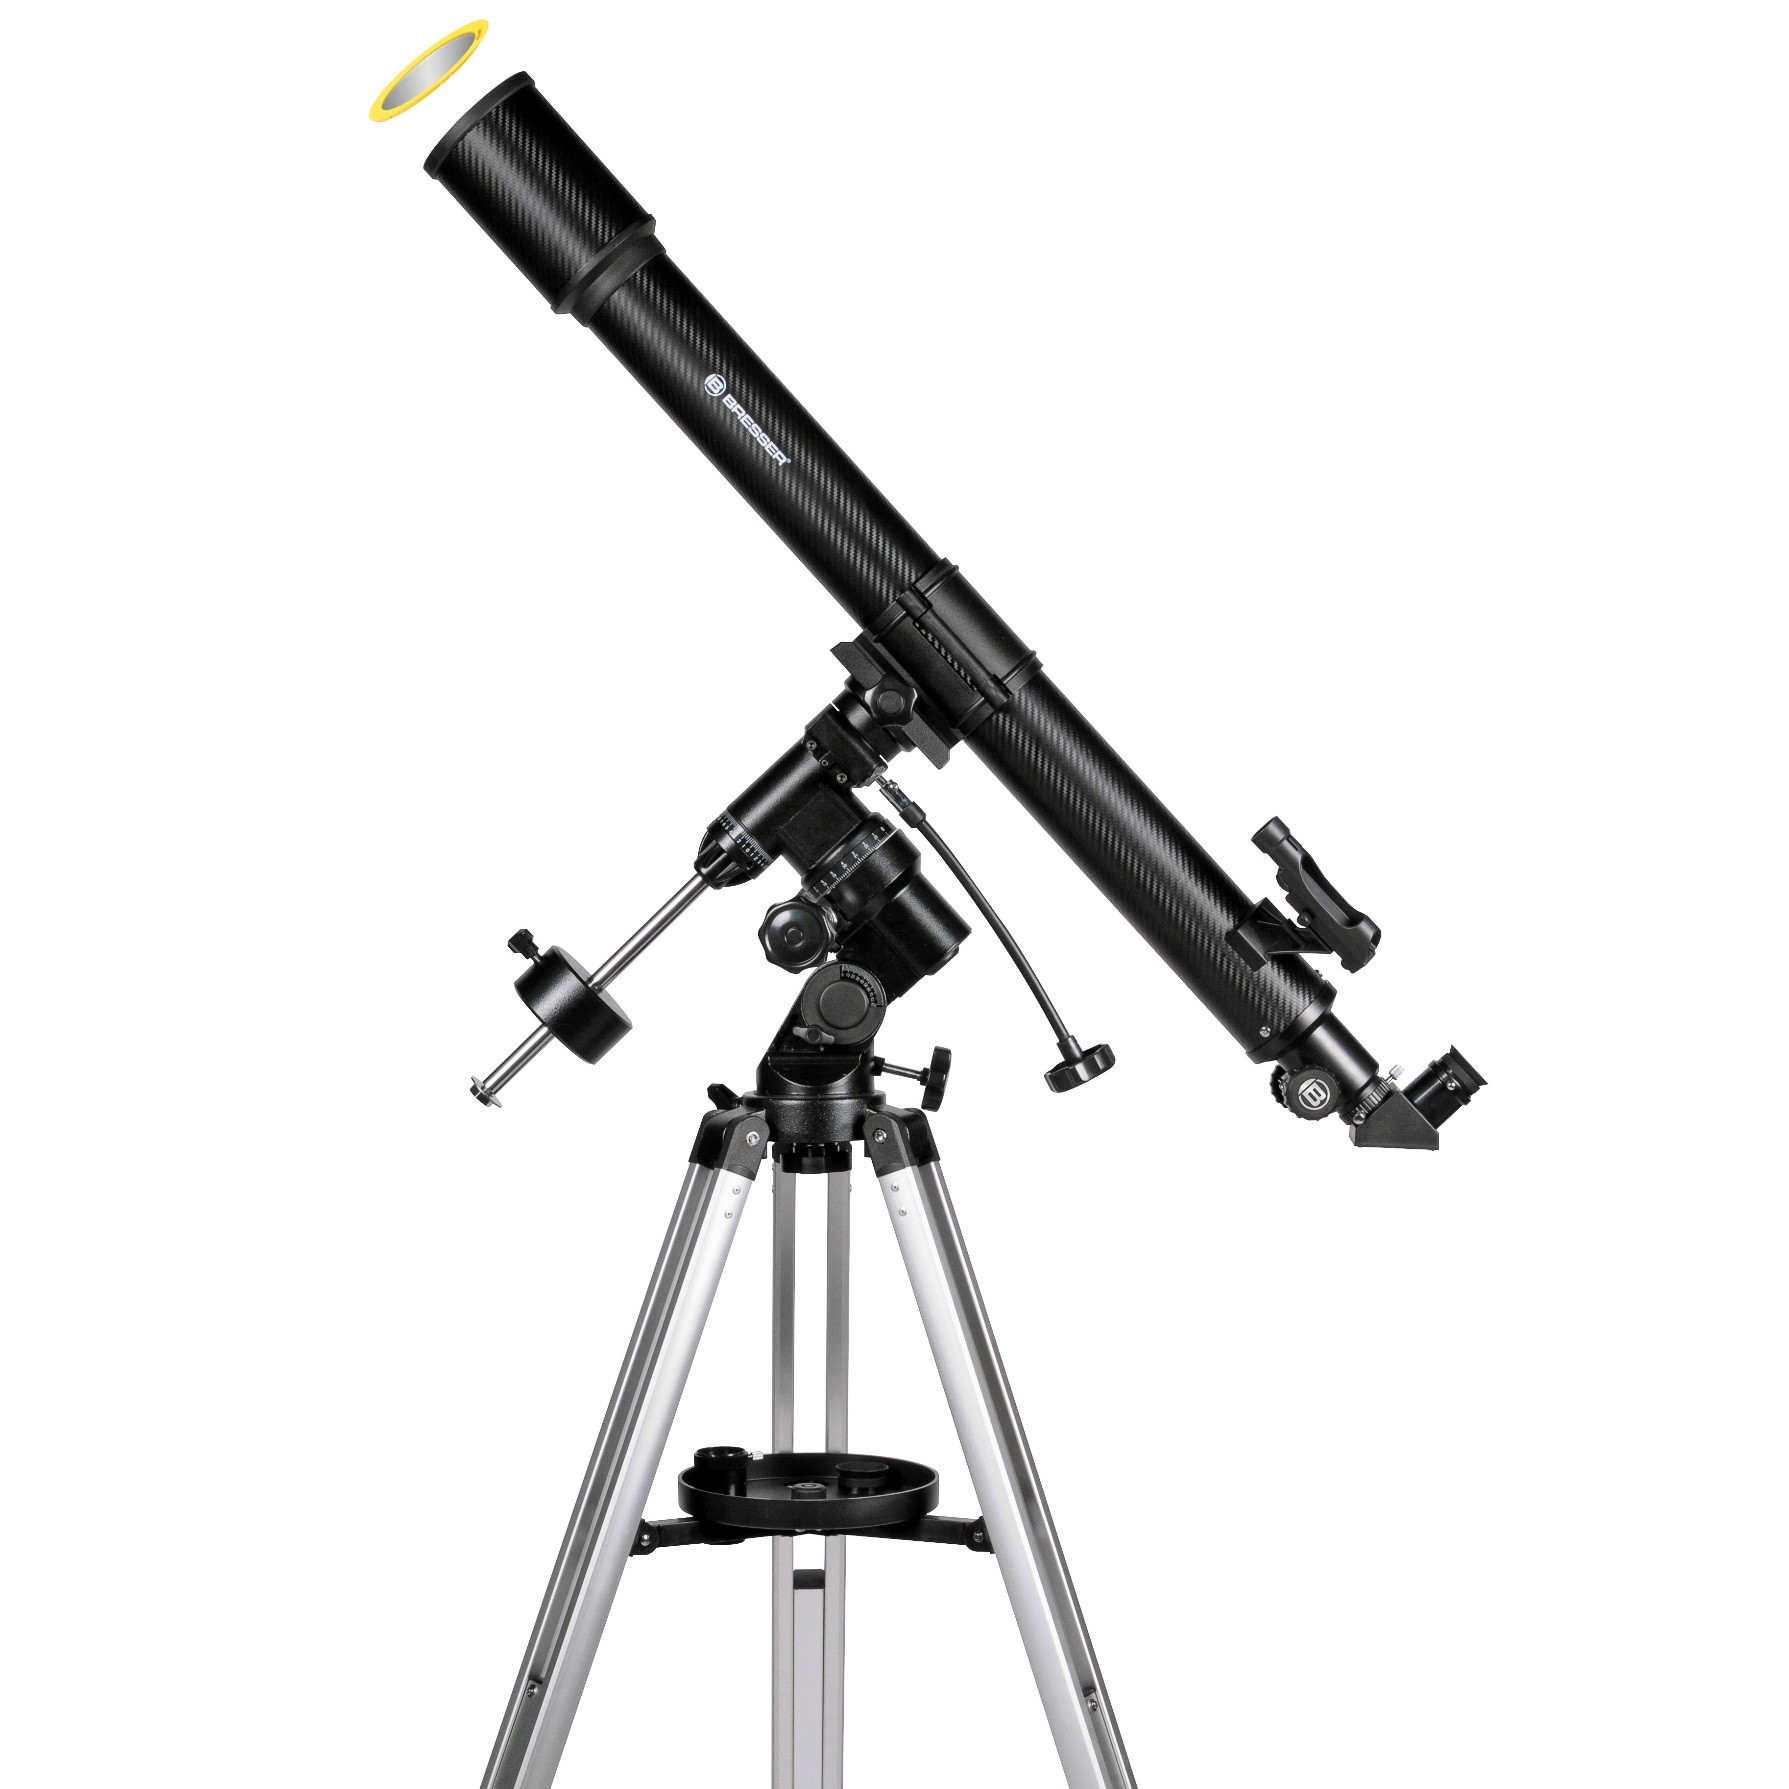 Bresser Lyra 70mm EQ-SKY Telescope Carbon Texture with Solar Filter and Smartphone Holder